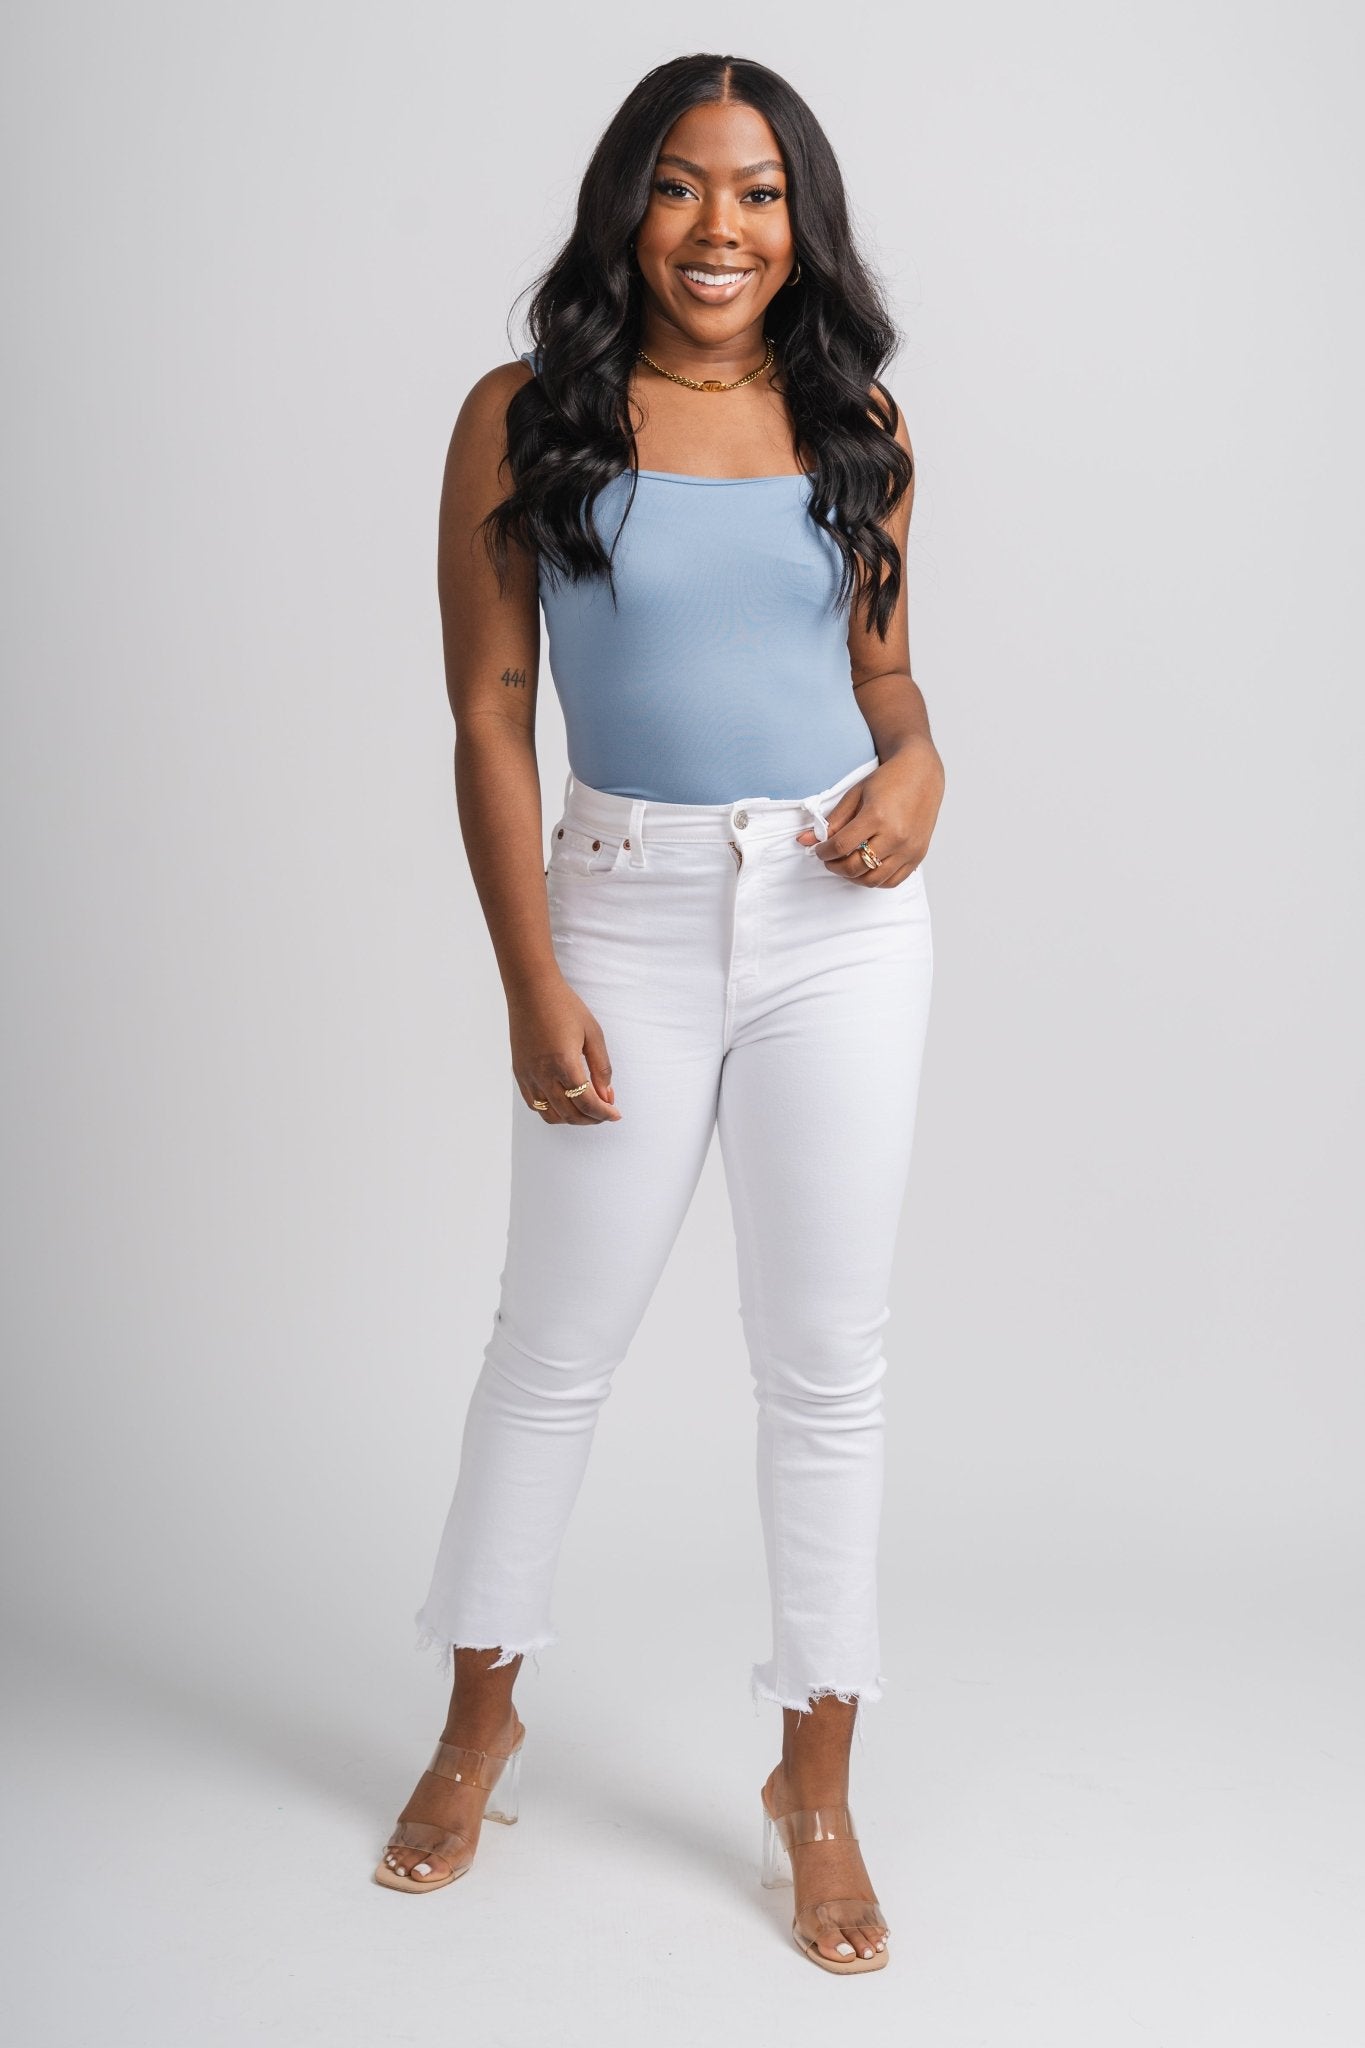 Square neck bodysuit dusty blue - Cute bodysuit - Trendy Easter Clothing Line at Lush Fashion Lounge Boutique in Oklahoma